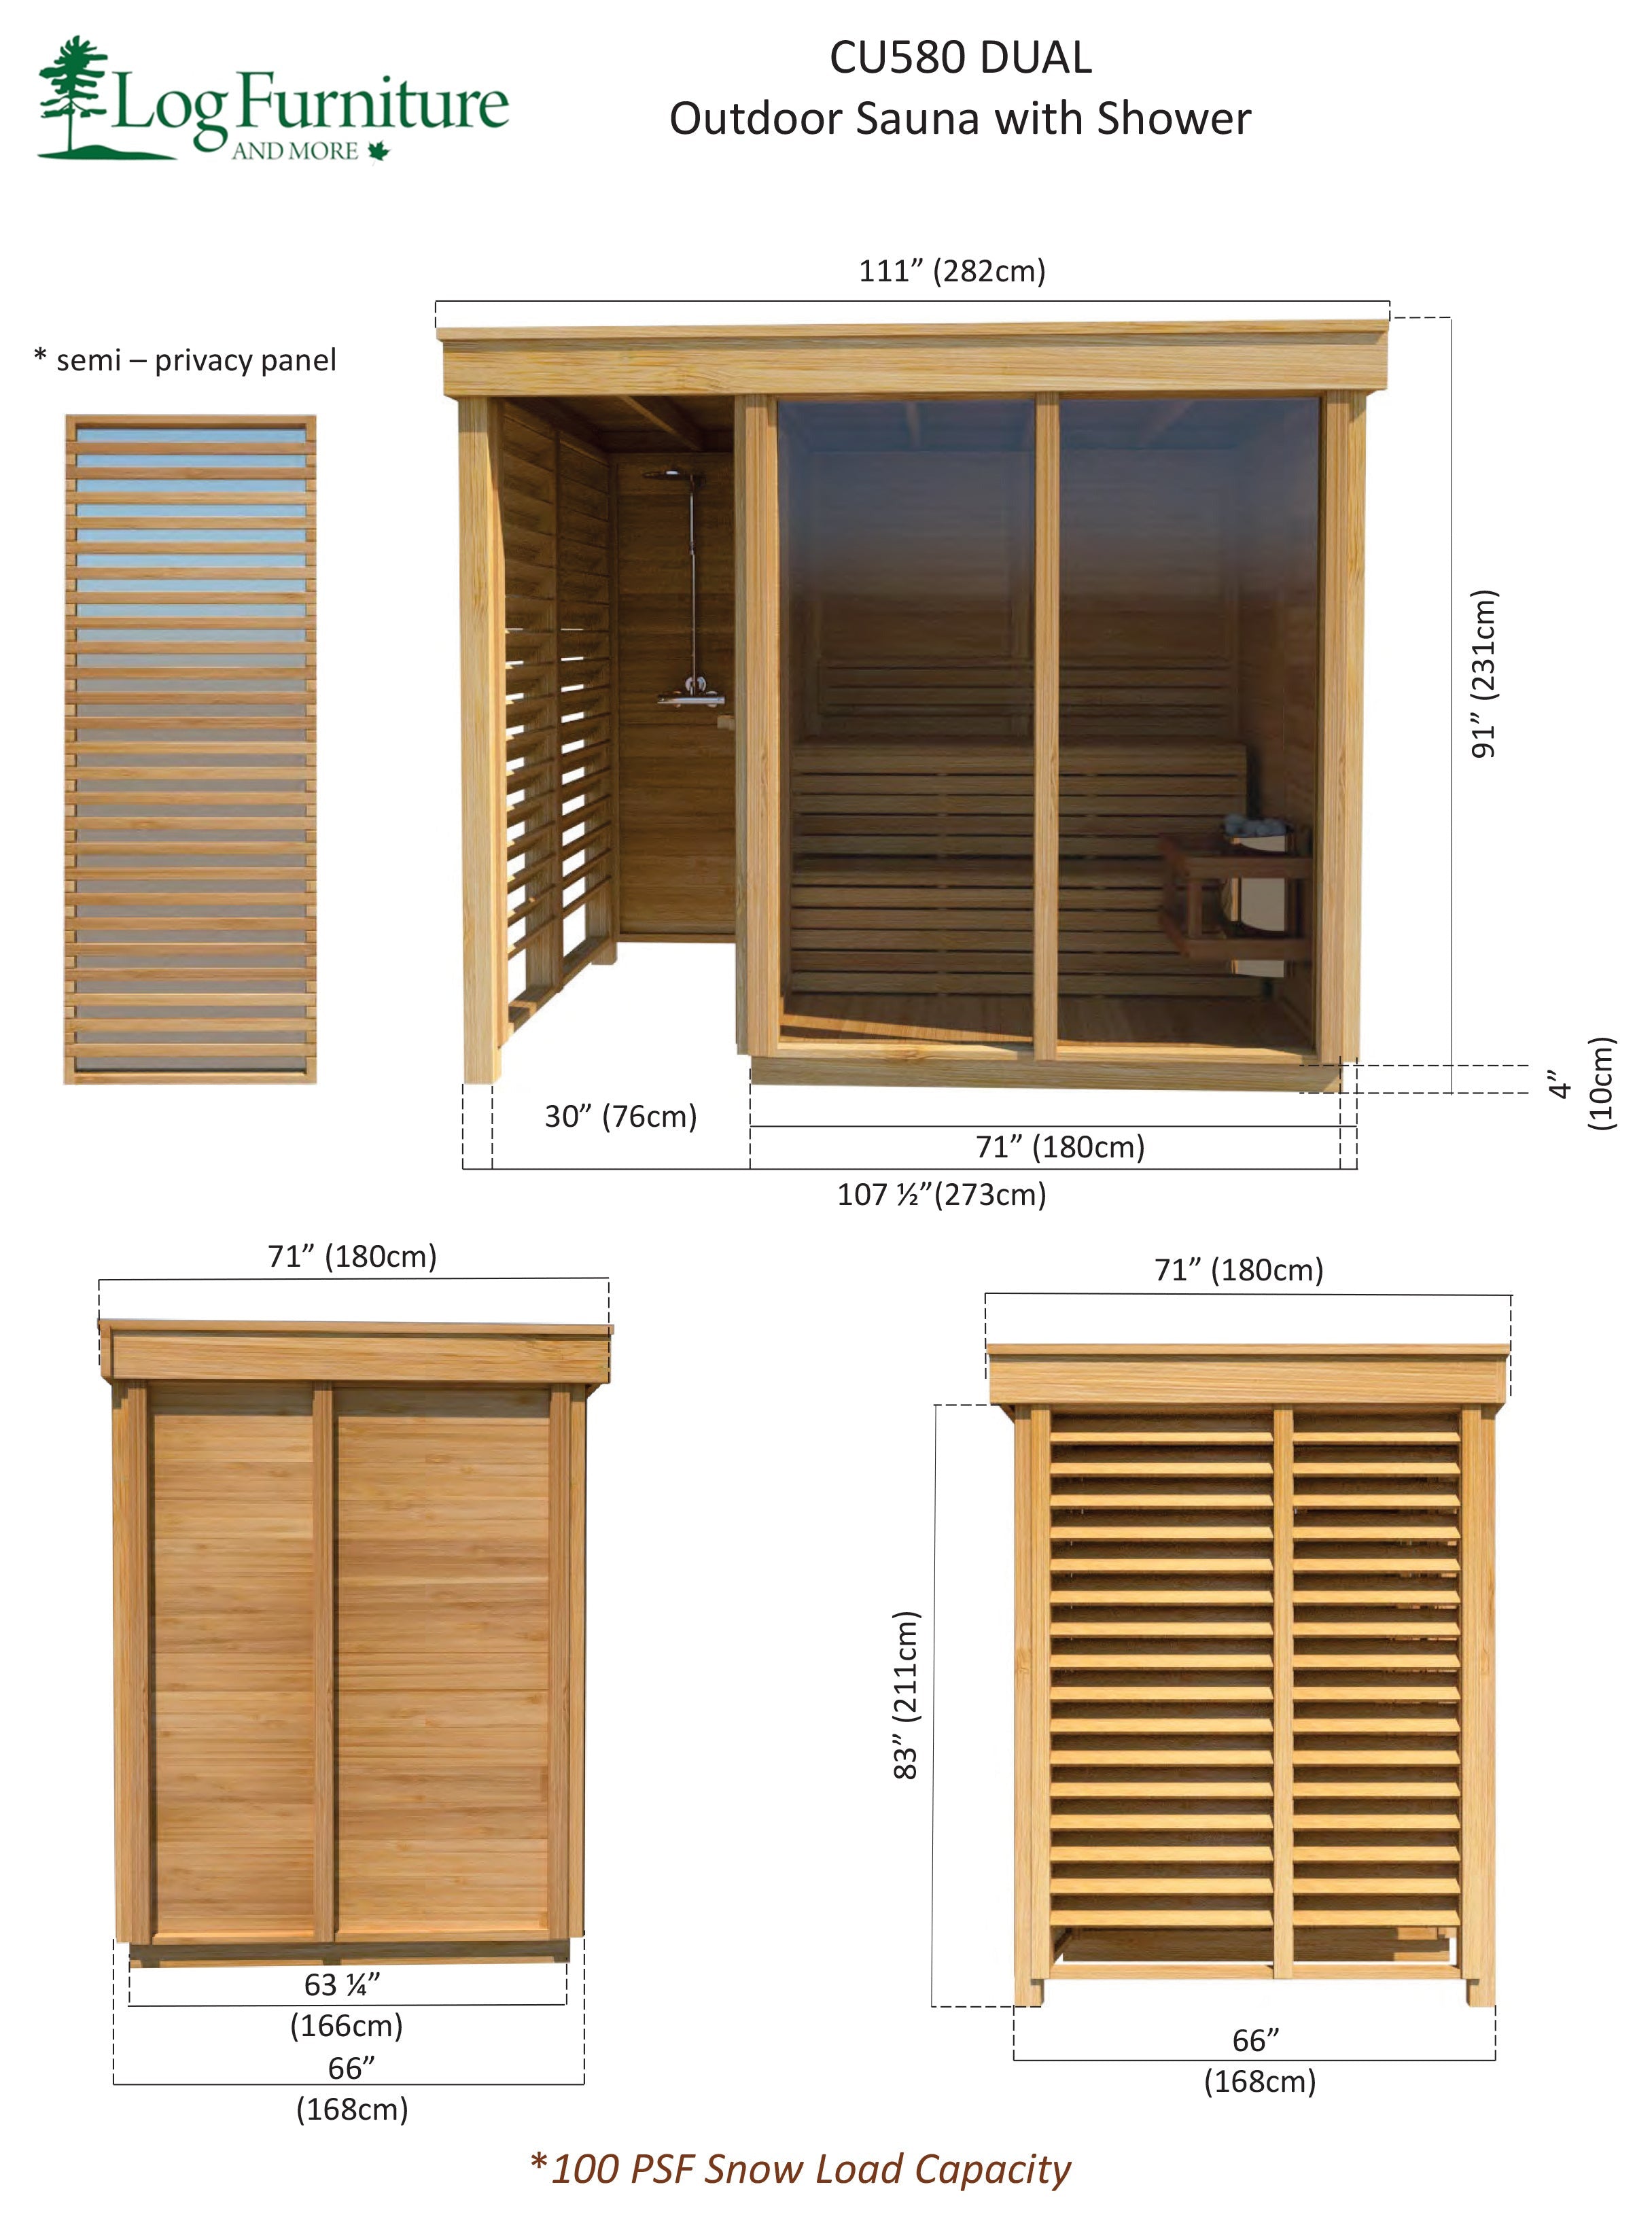 Modern Box Outdoor Sauna with Shower Dimensions 2/2